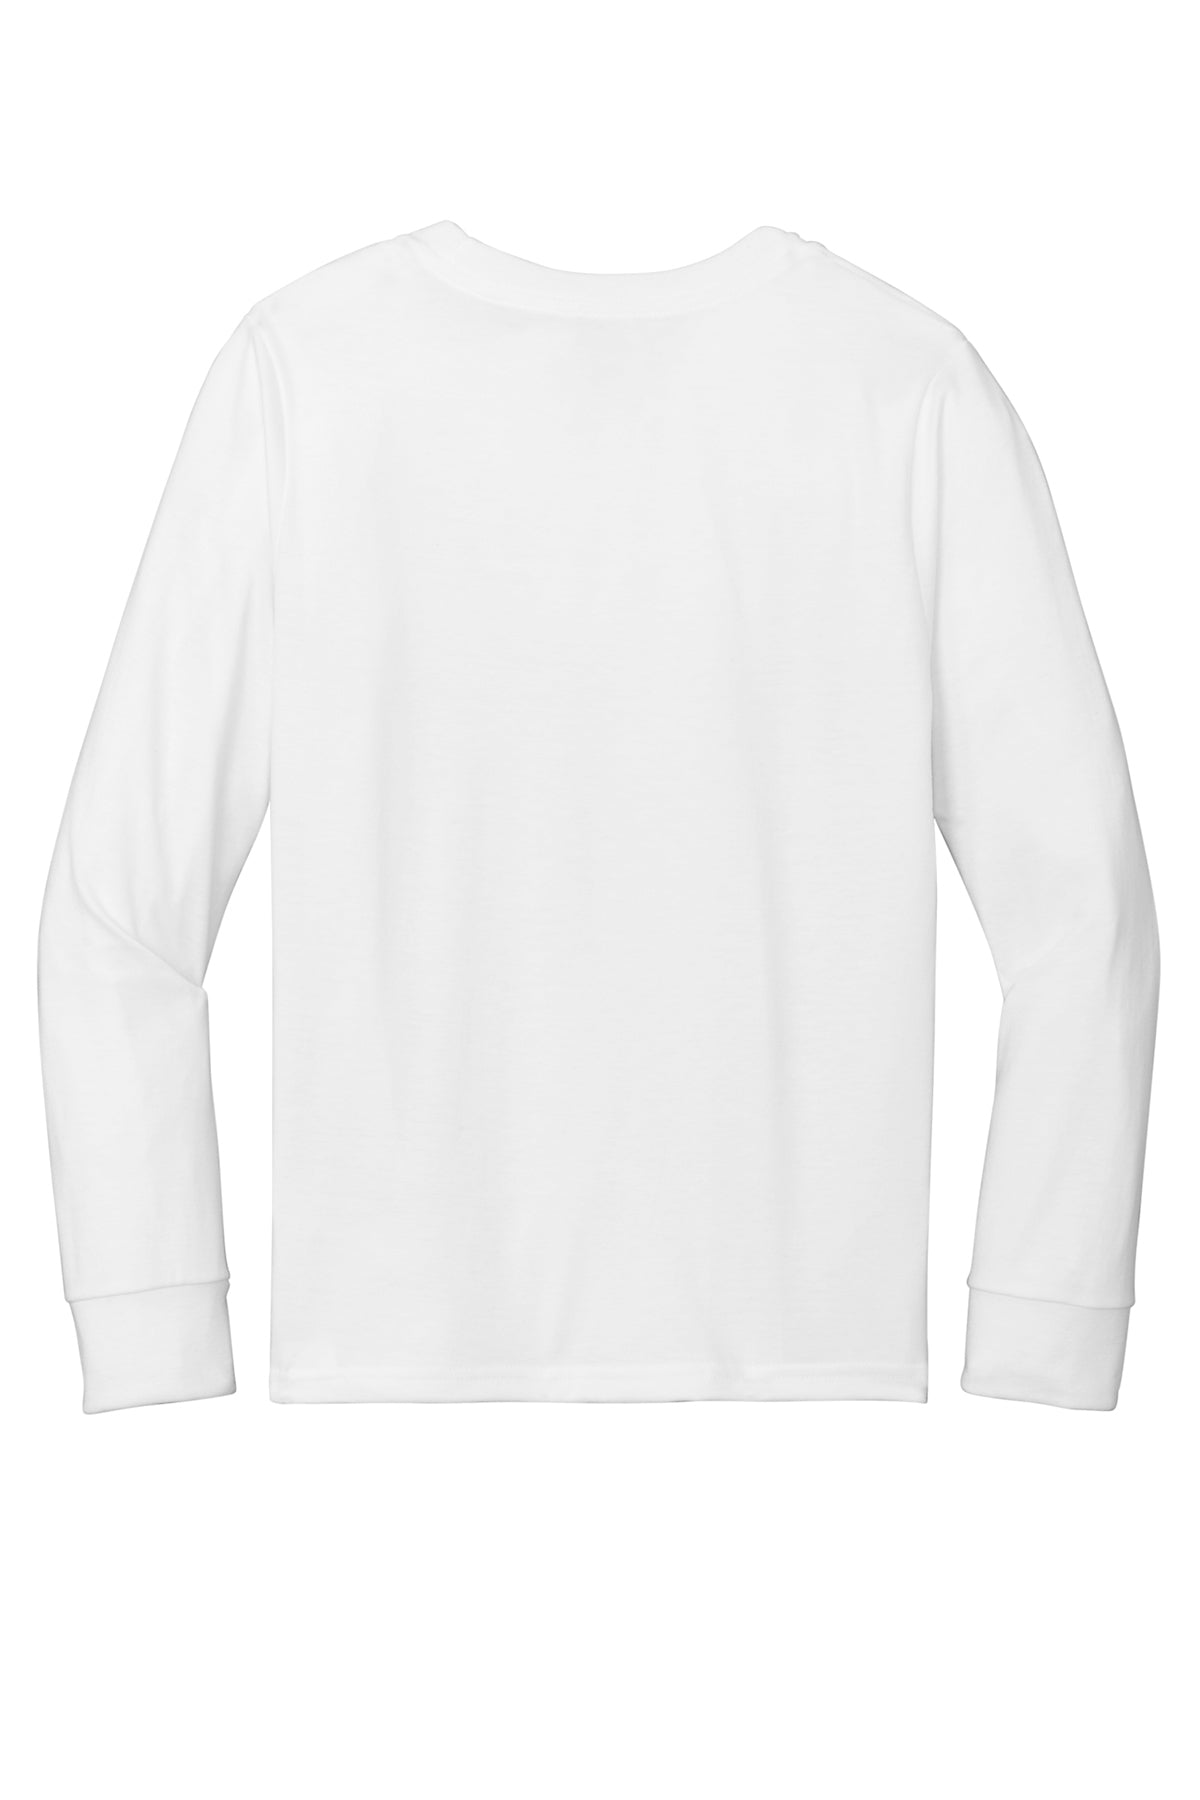 Hardwood - District Youth Perfect Tri Long Sleeve - White - IMS Apparel DT132YWhite-S